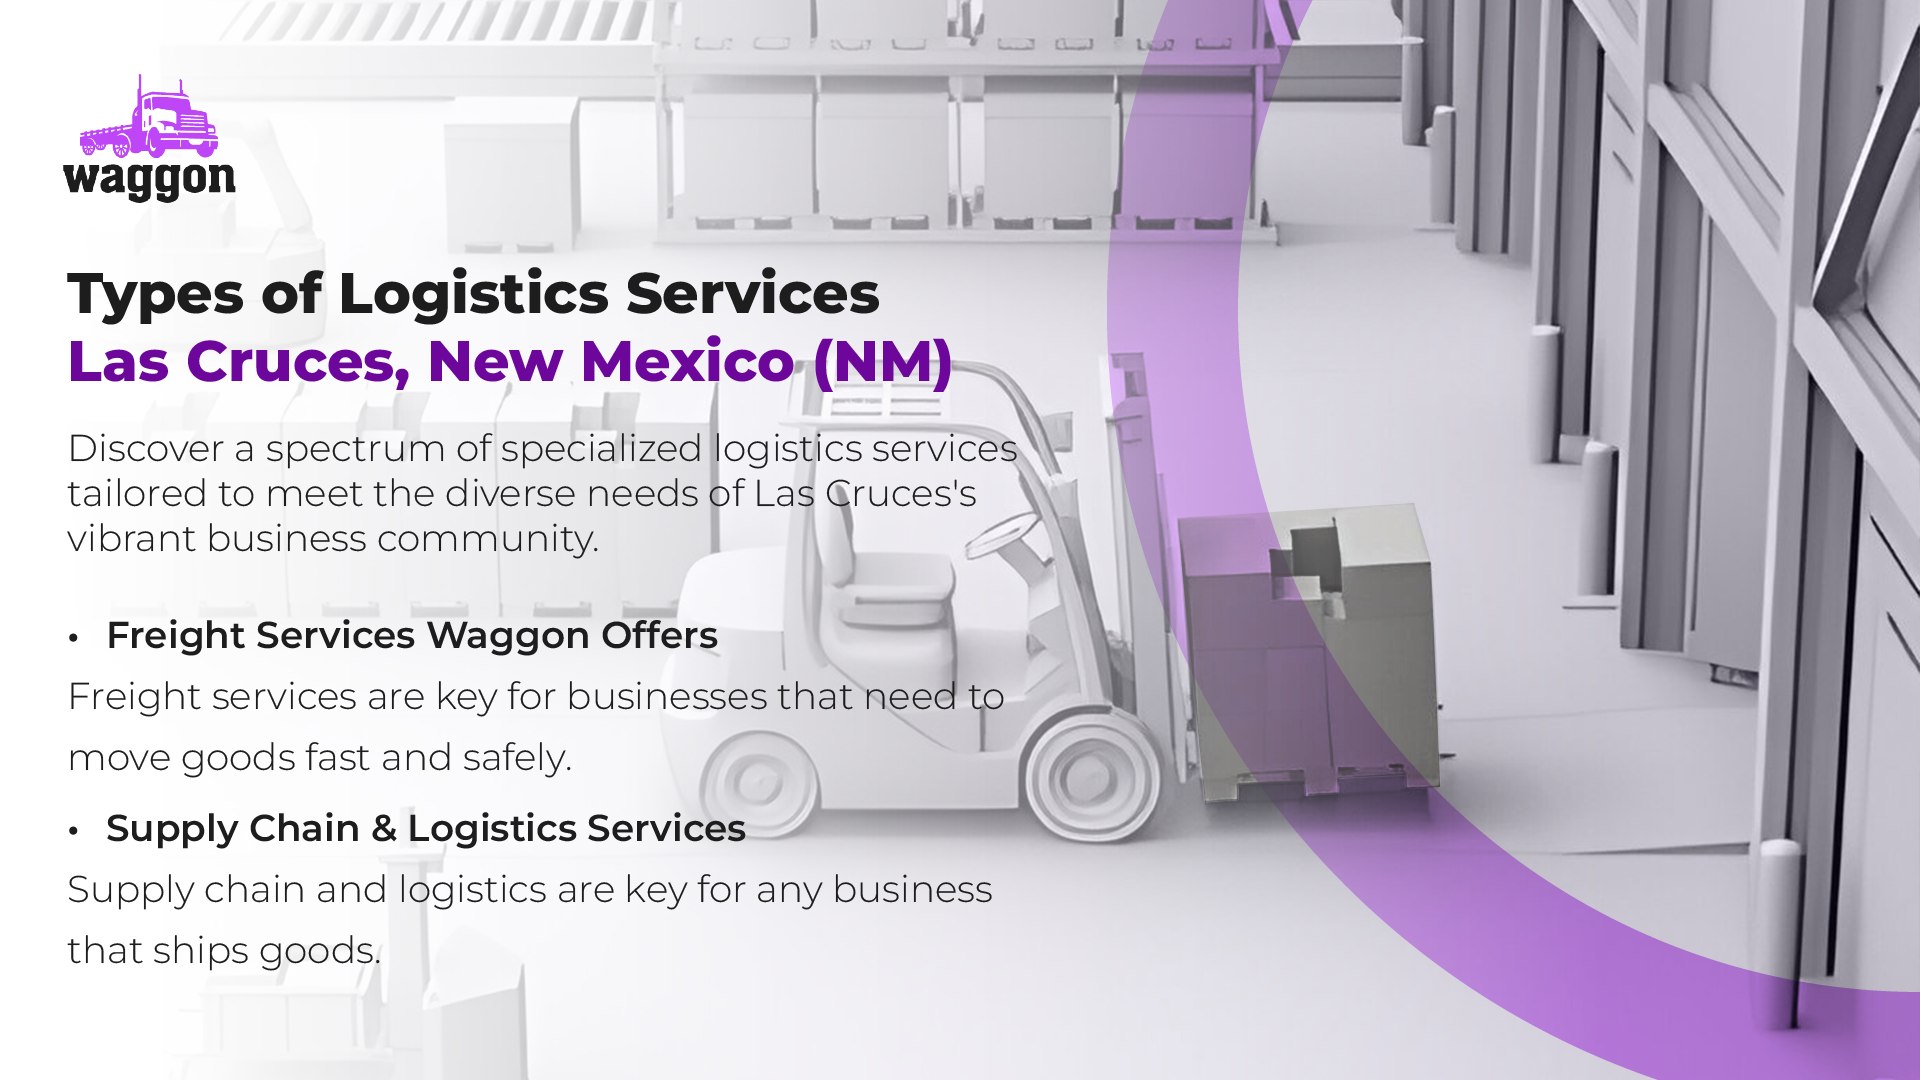 Types of Logistics Services in Las Cruces, New Mexico (NM)